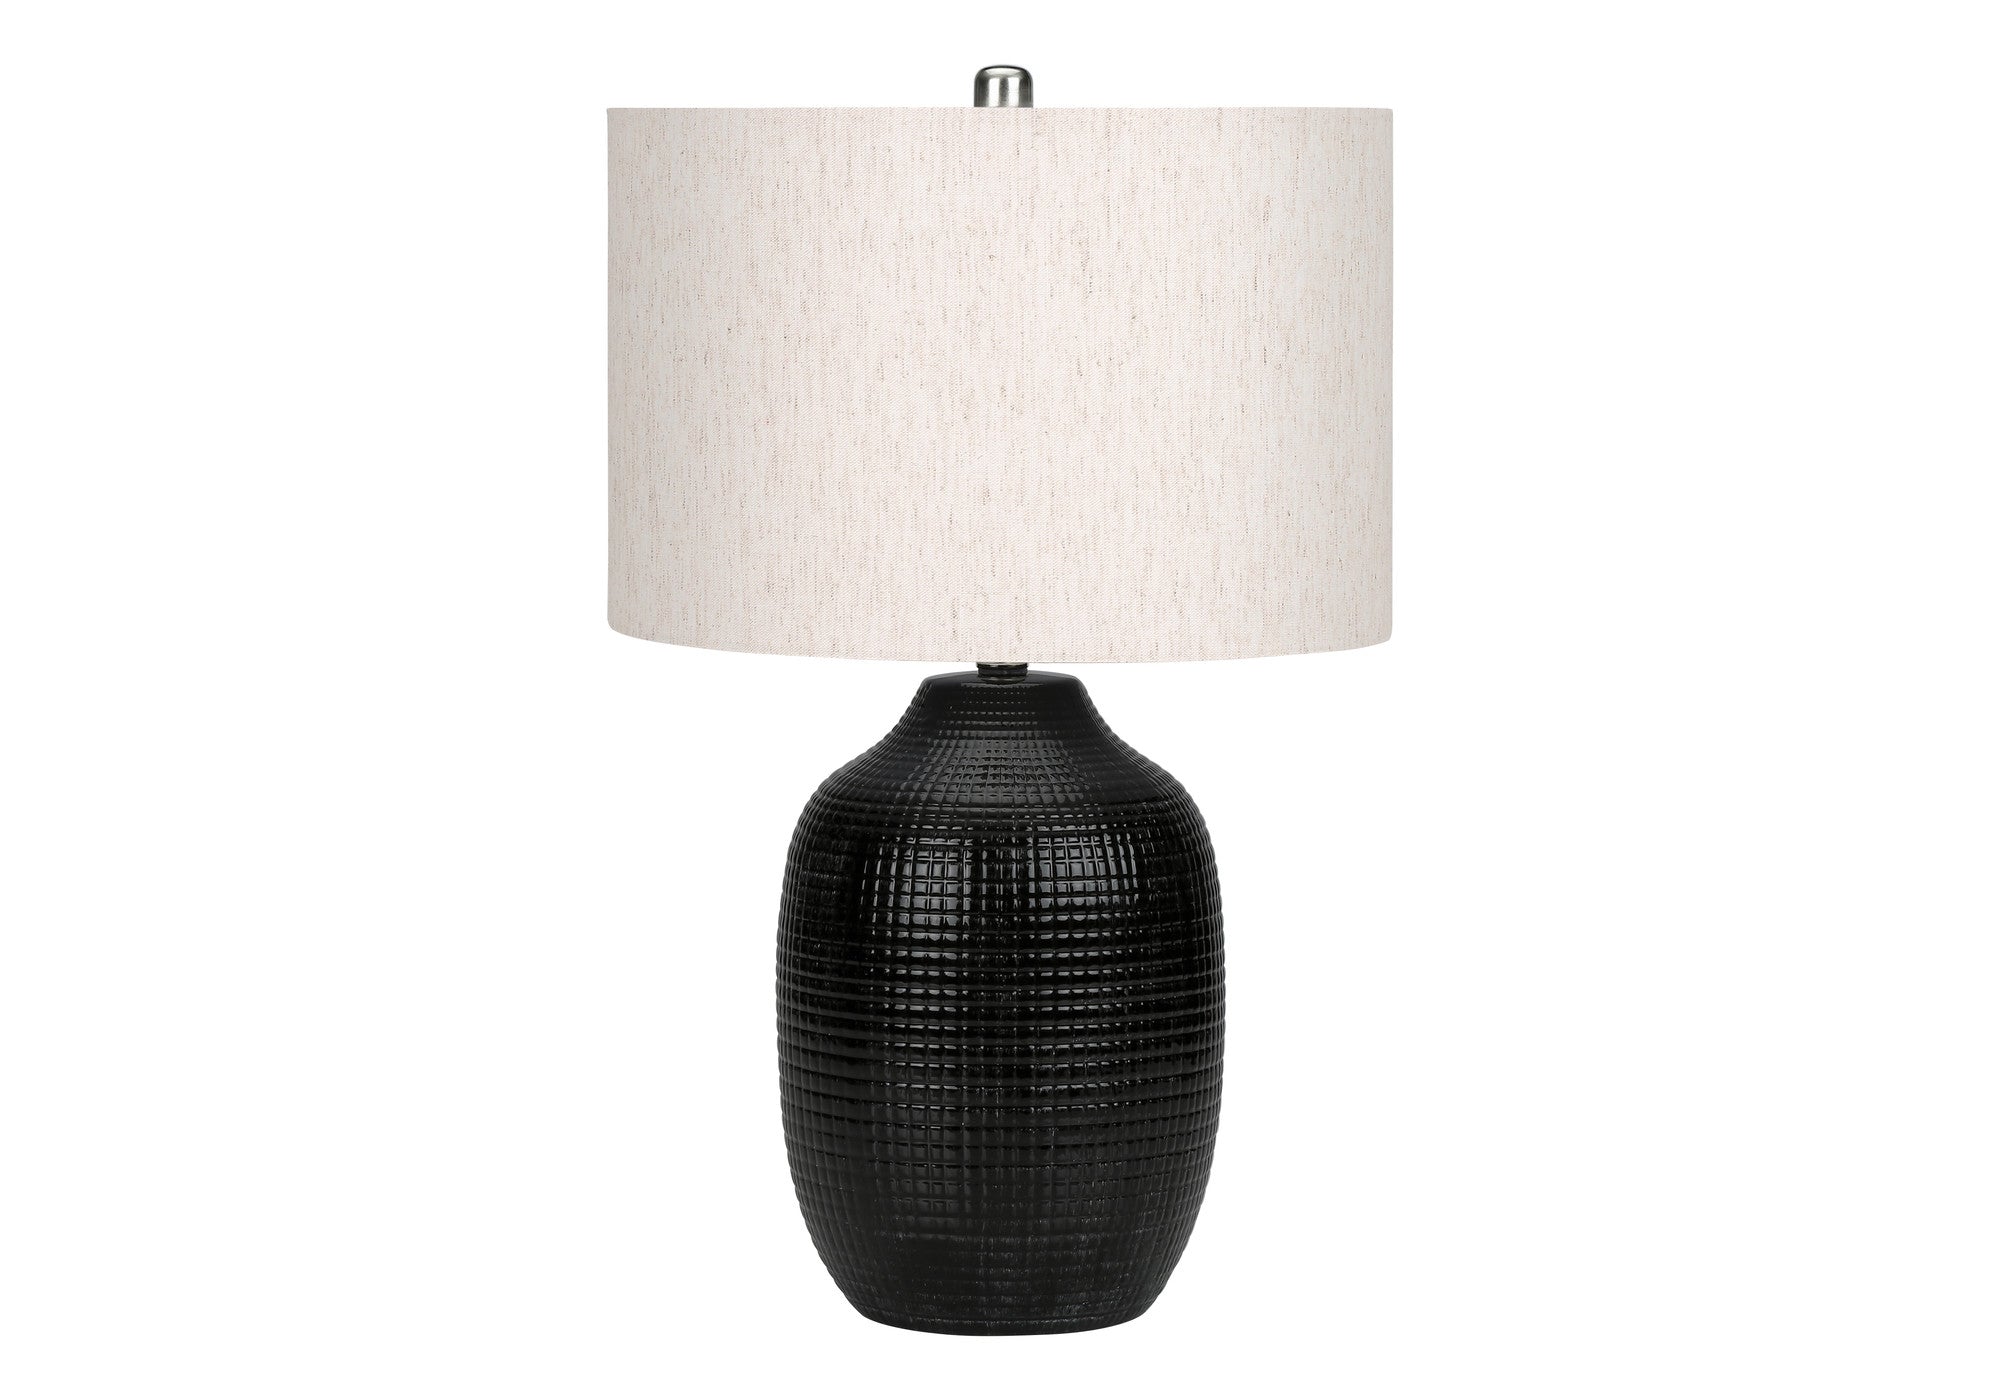 26" Black Ceramic Urn Table Lamp With Ivory Drum Shade